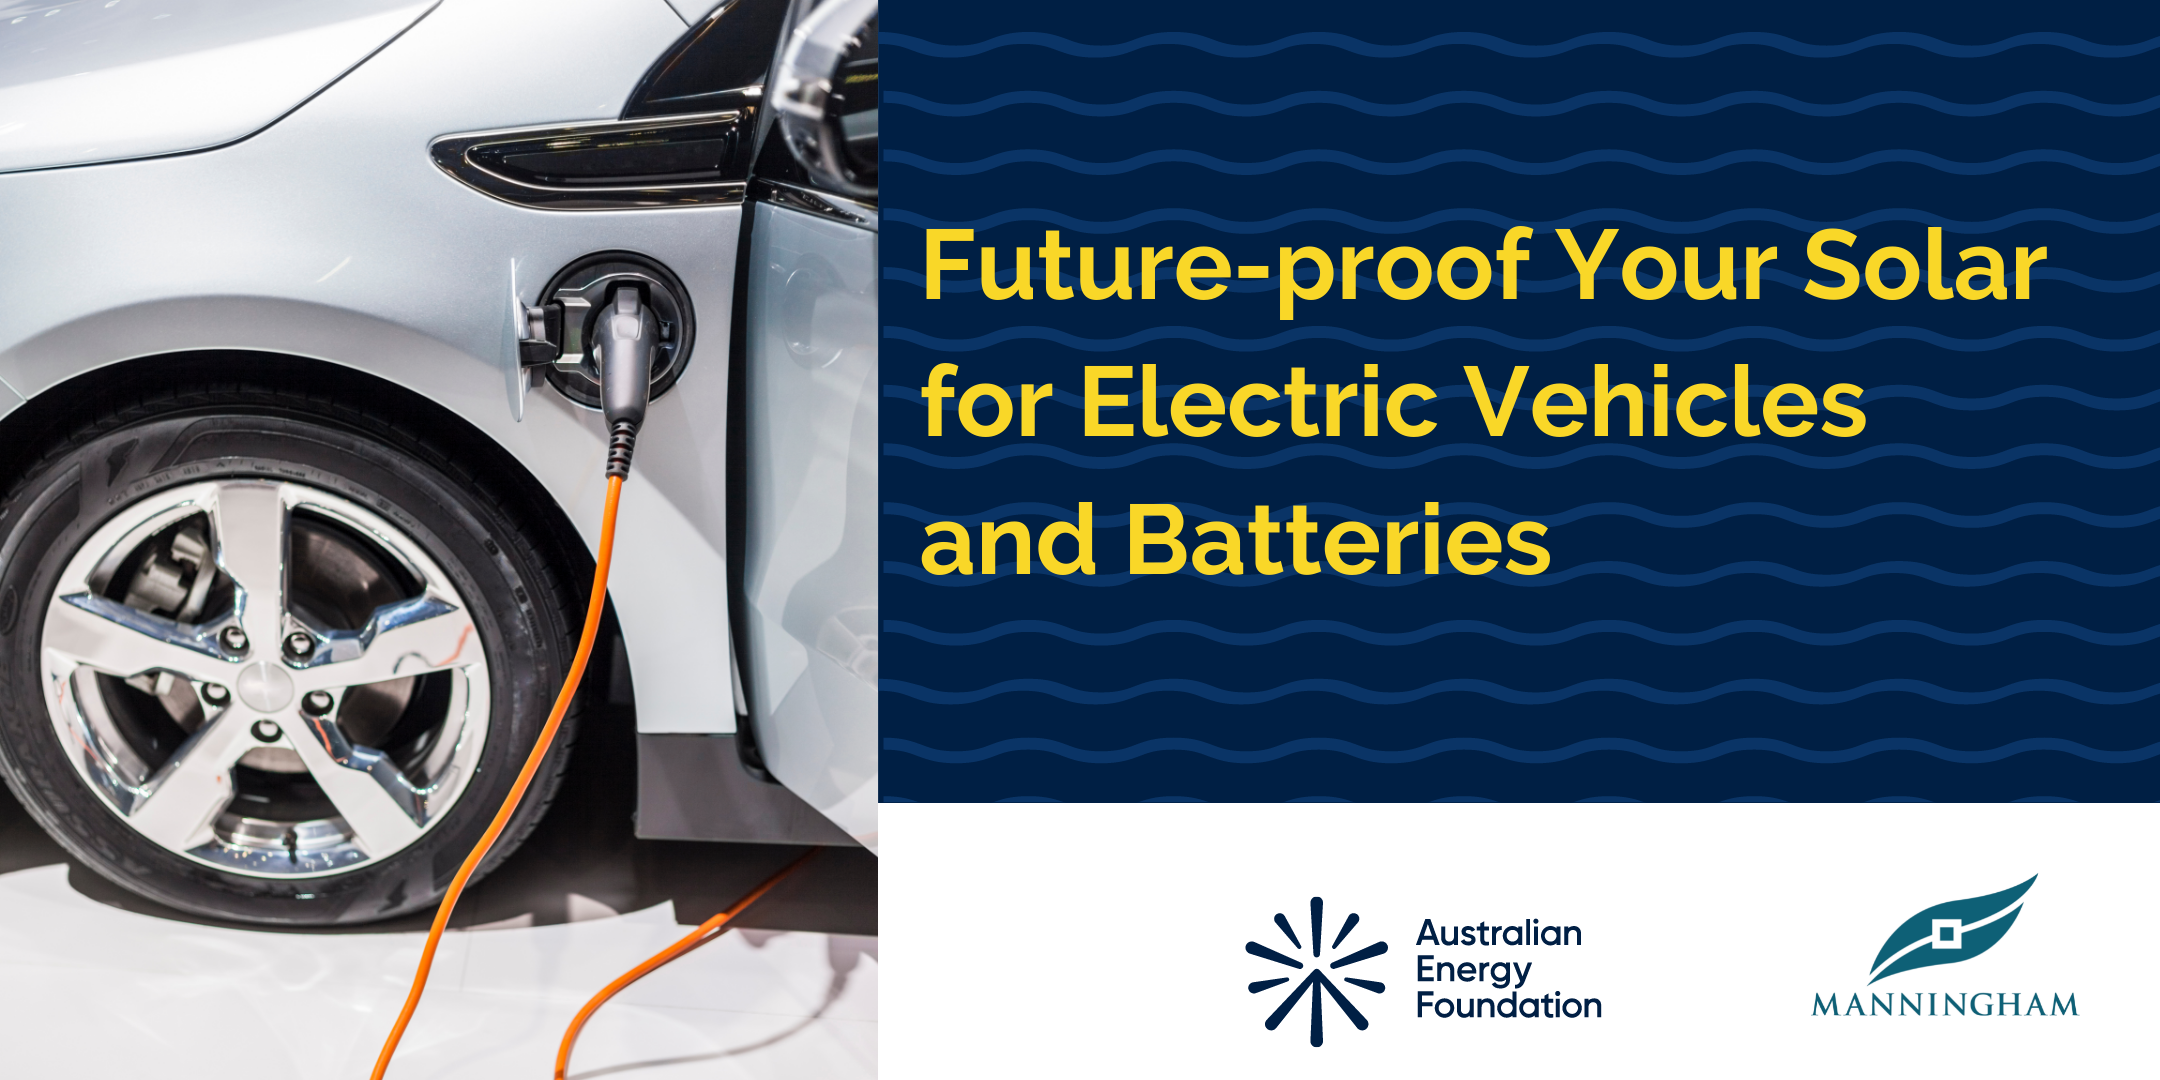 Image of a silver car with an electric charging cable plugged into it and the words future-proof your solar for electric vehicles and batteries